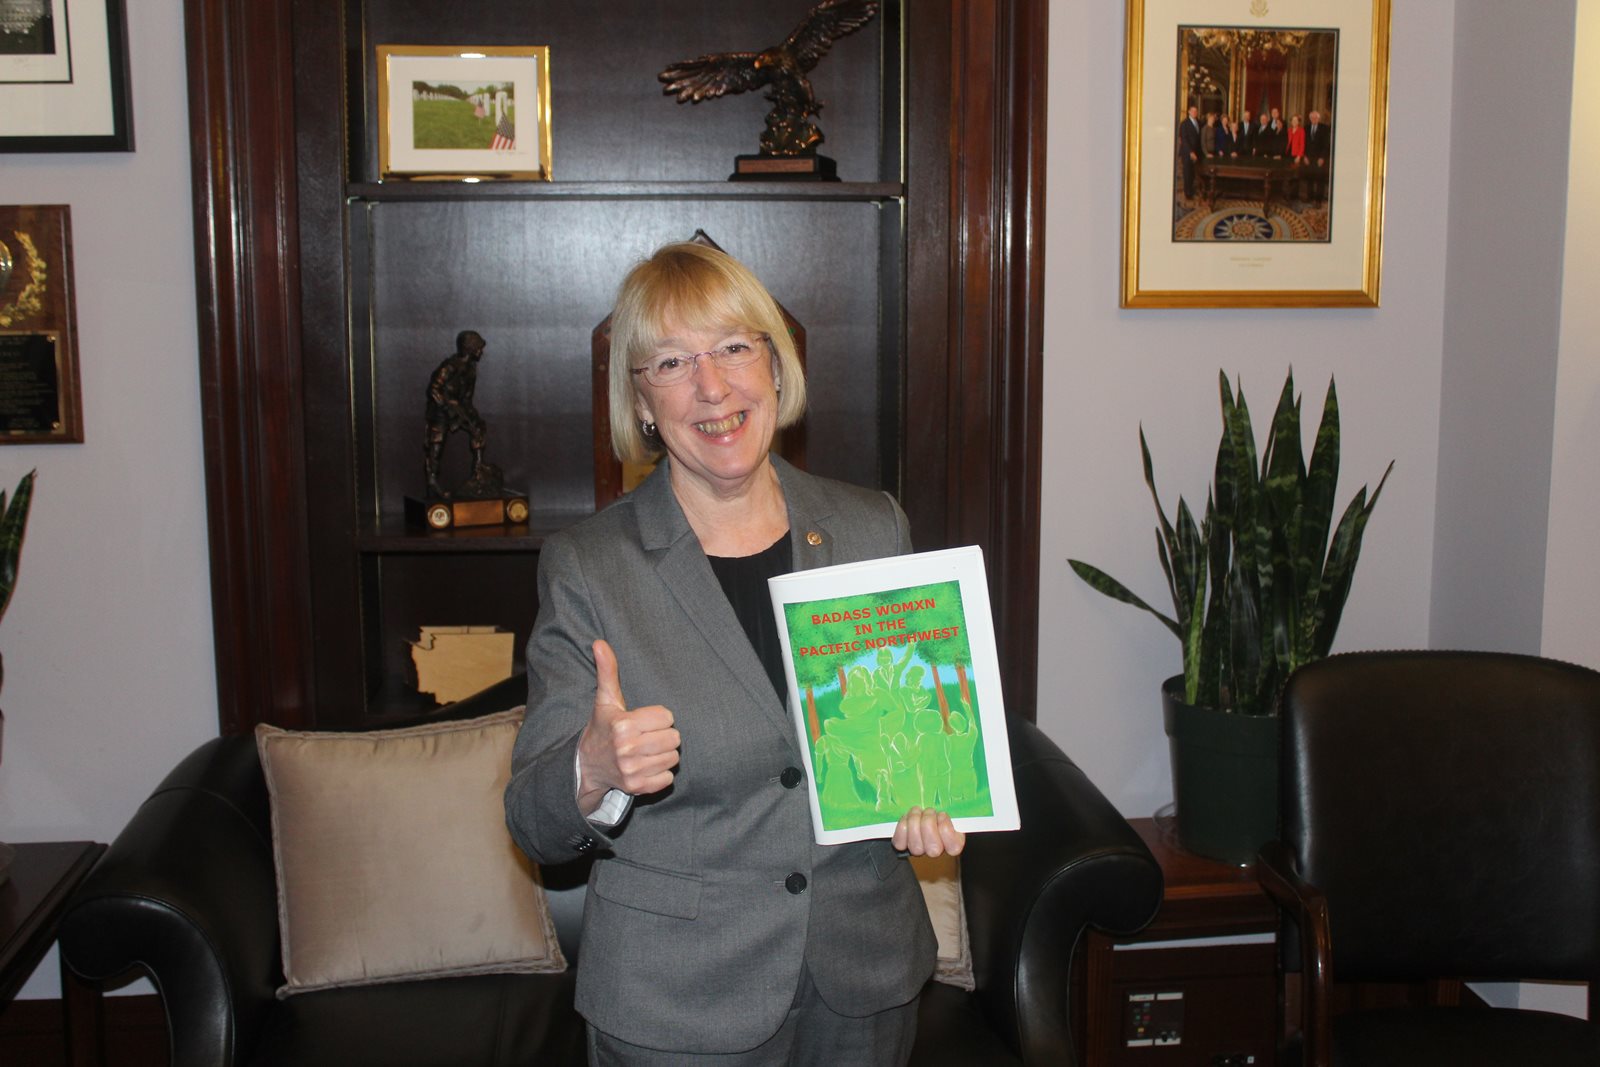 United States Senator Patty Murray with her copy of Badass Womxn in the Pacific Northwest!